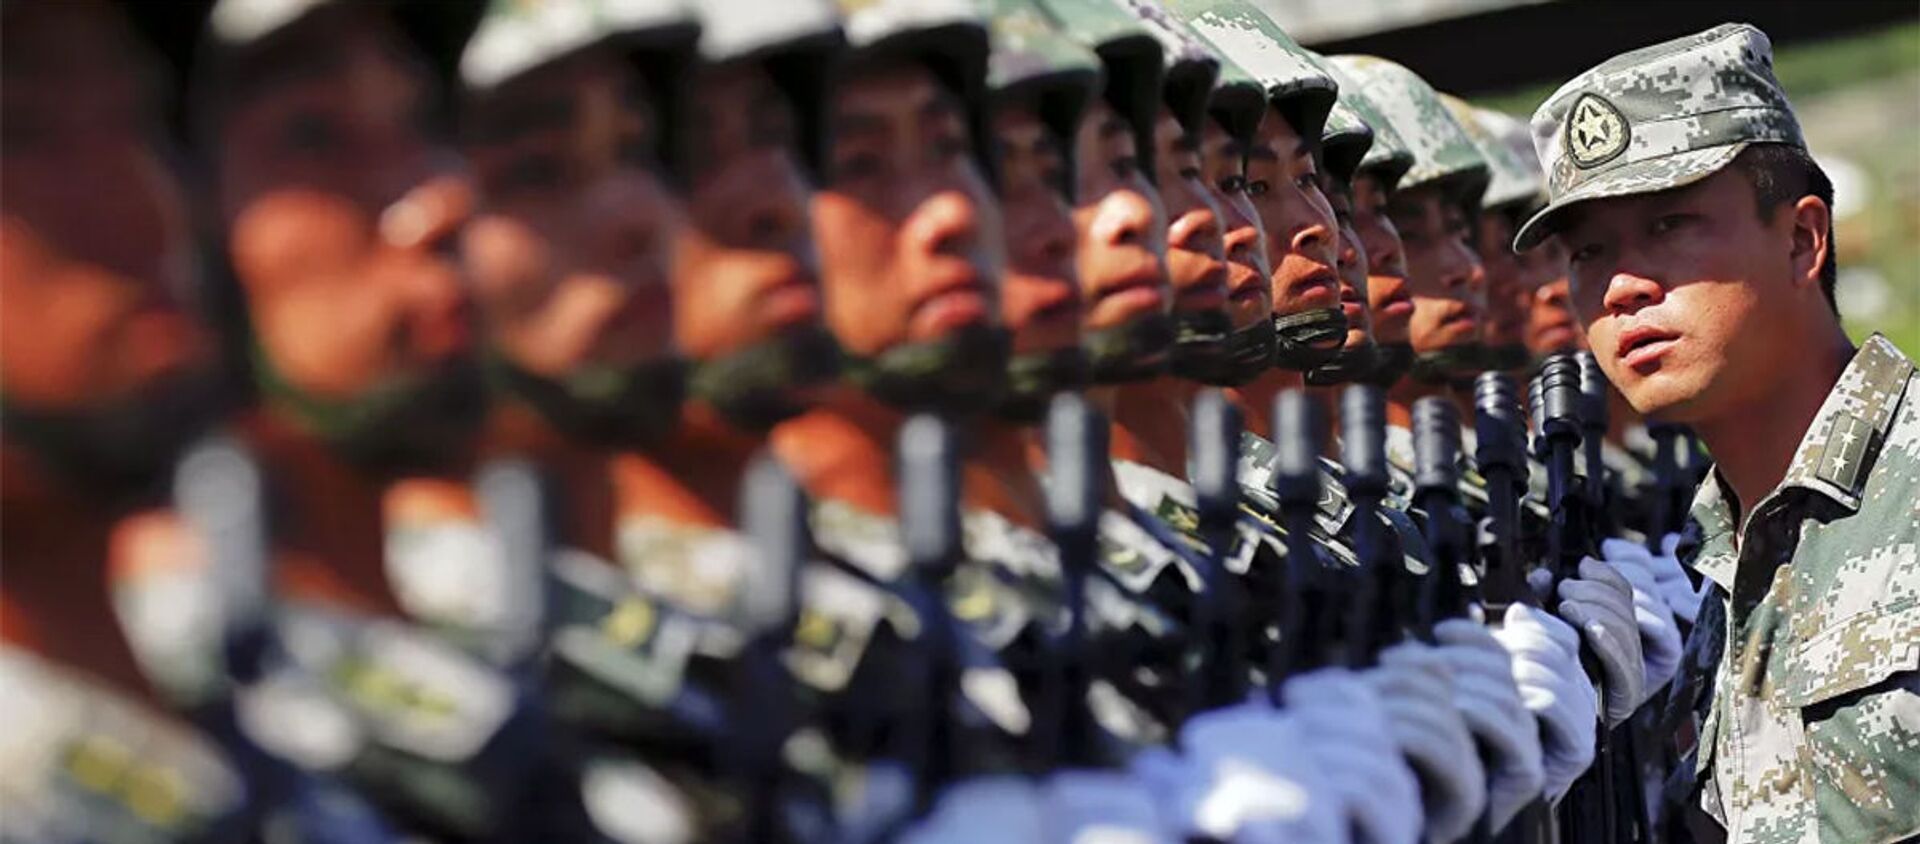 An officer gives instructions as soldiers of China's People's Liberation Army form a line during a training session for a military parade to mark the 70th anniversary of the end of World War Two, at a military base in Beijing, China, August 22, 2015 - 俄羅斯衛星通訊社, 1920, 18.08.2021